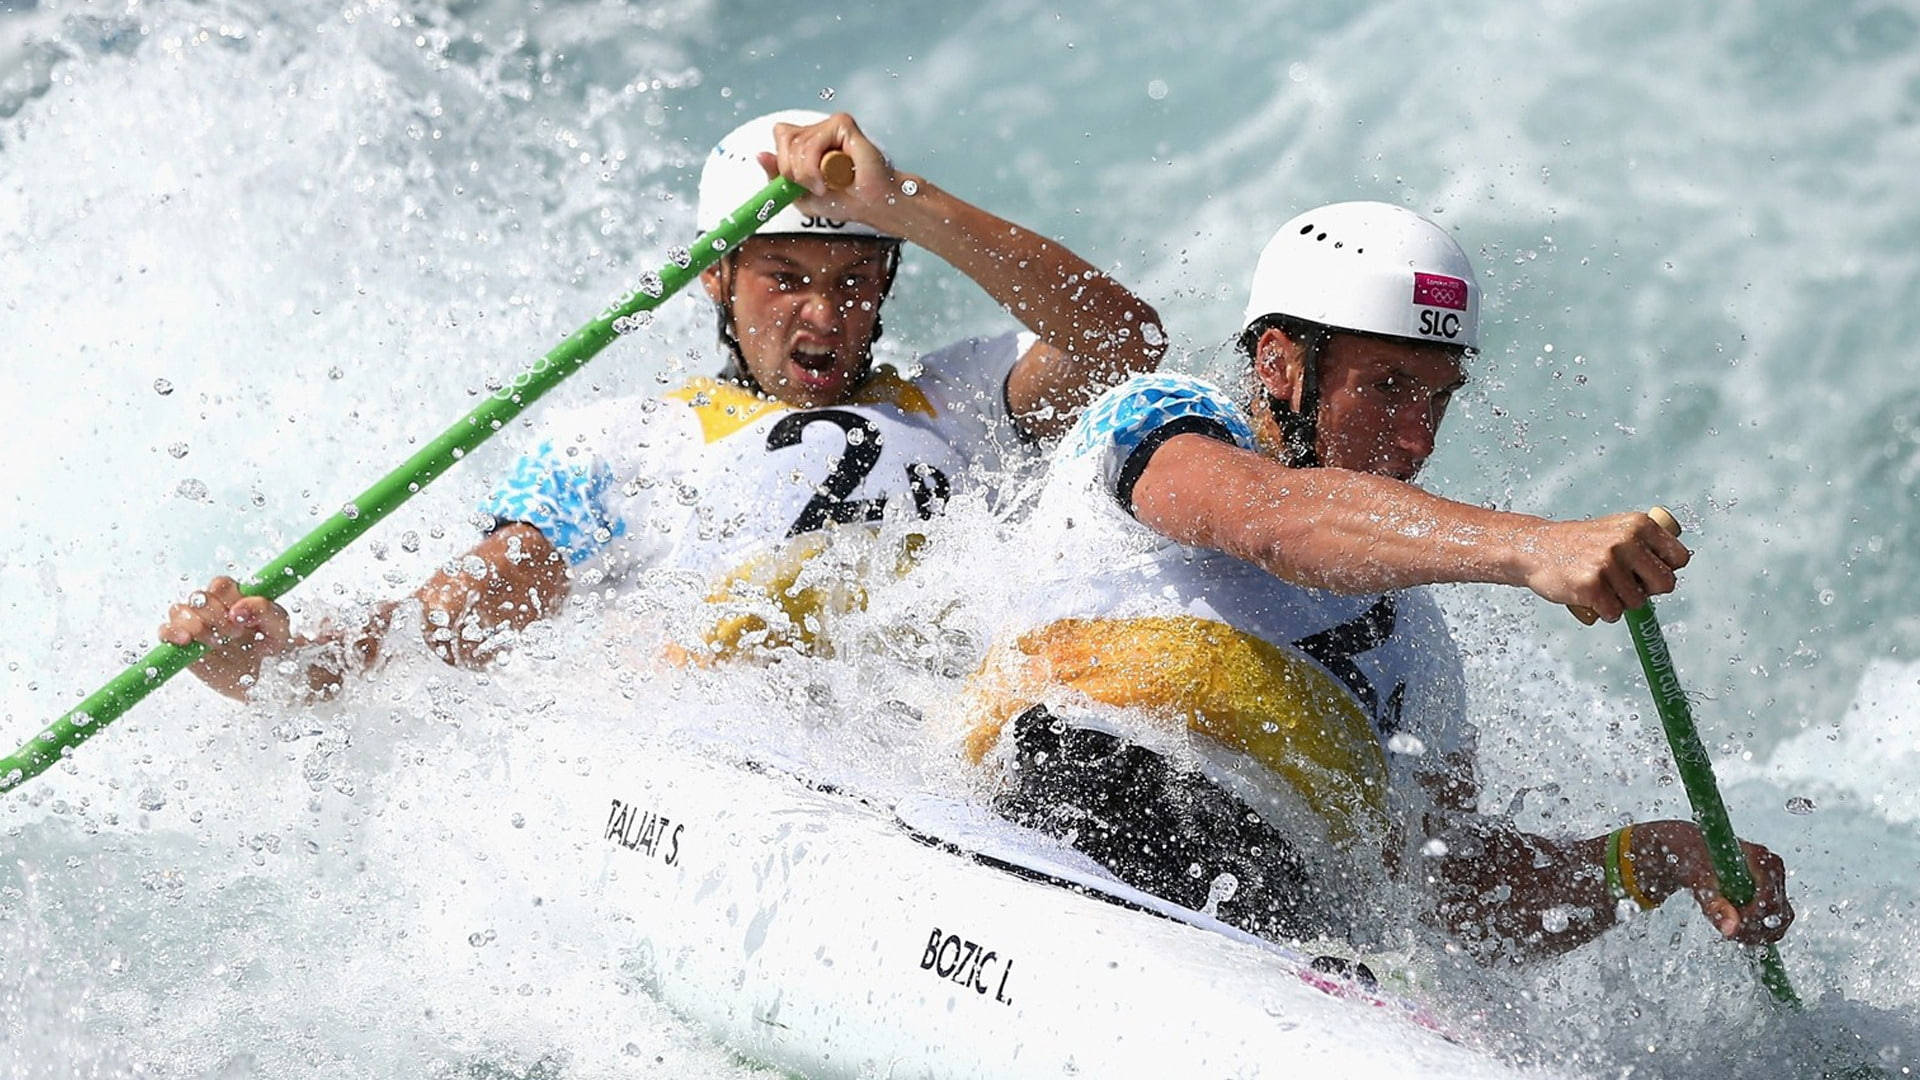 Embrace The Victory - Olympic Canoeists From Canada Celebrating Their Gold Medal